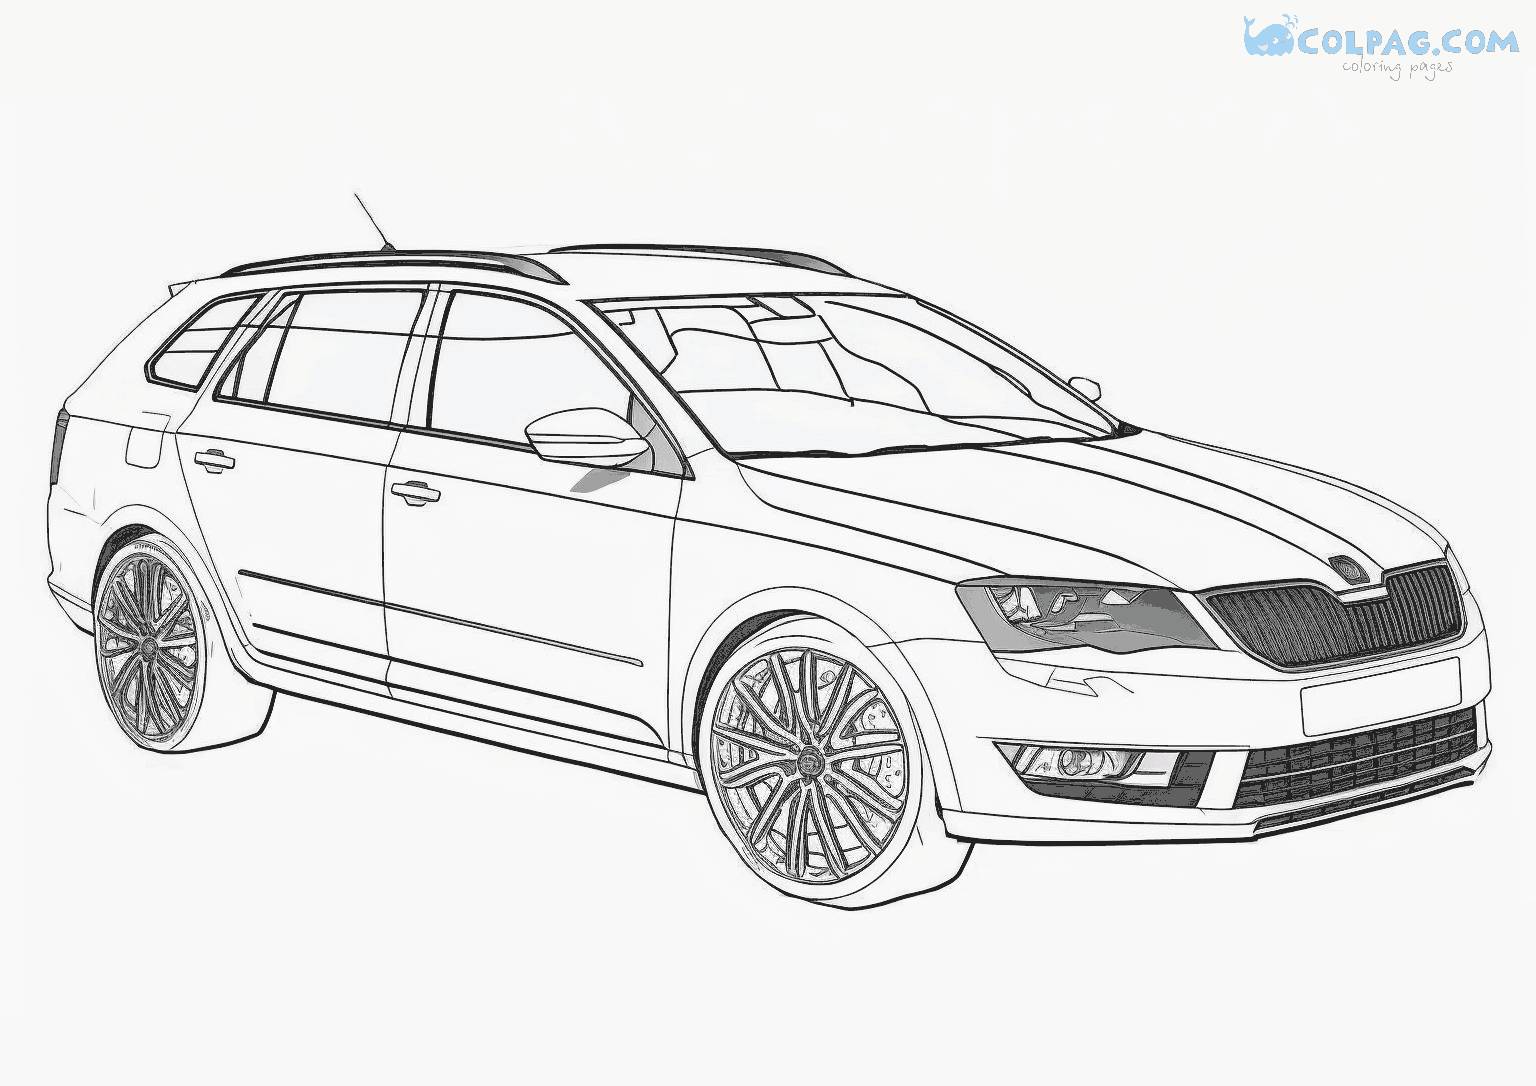 Skoda Octavia Printable Coloring Pages